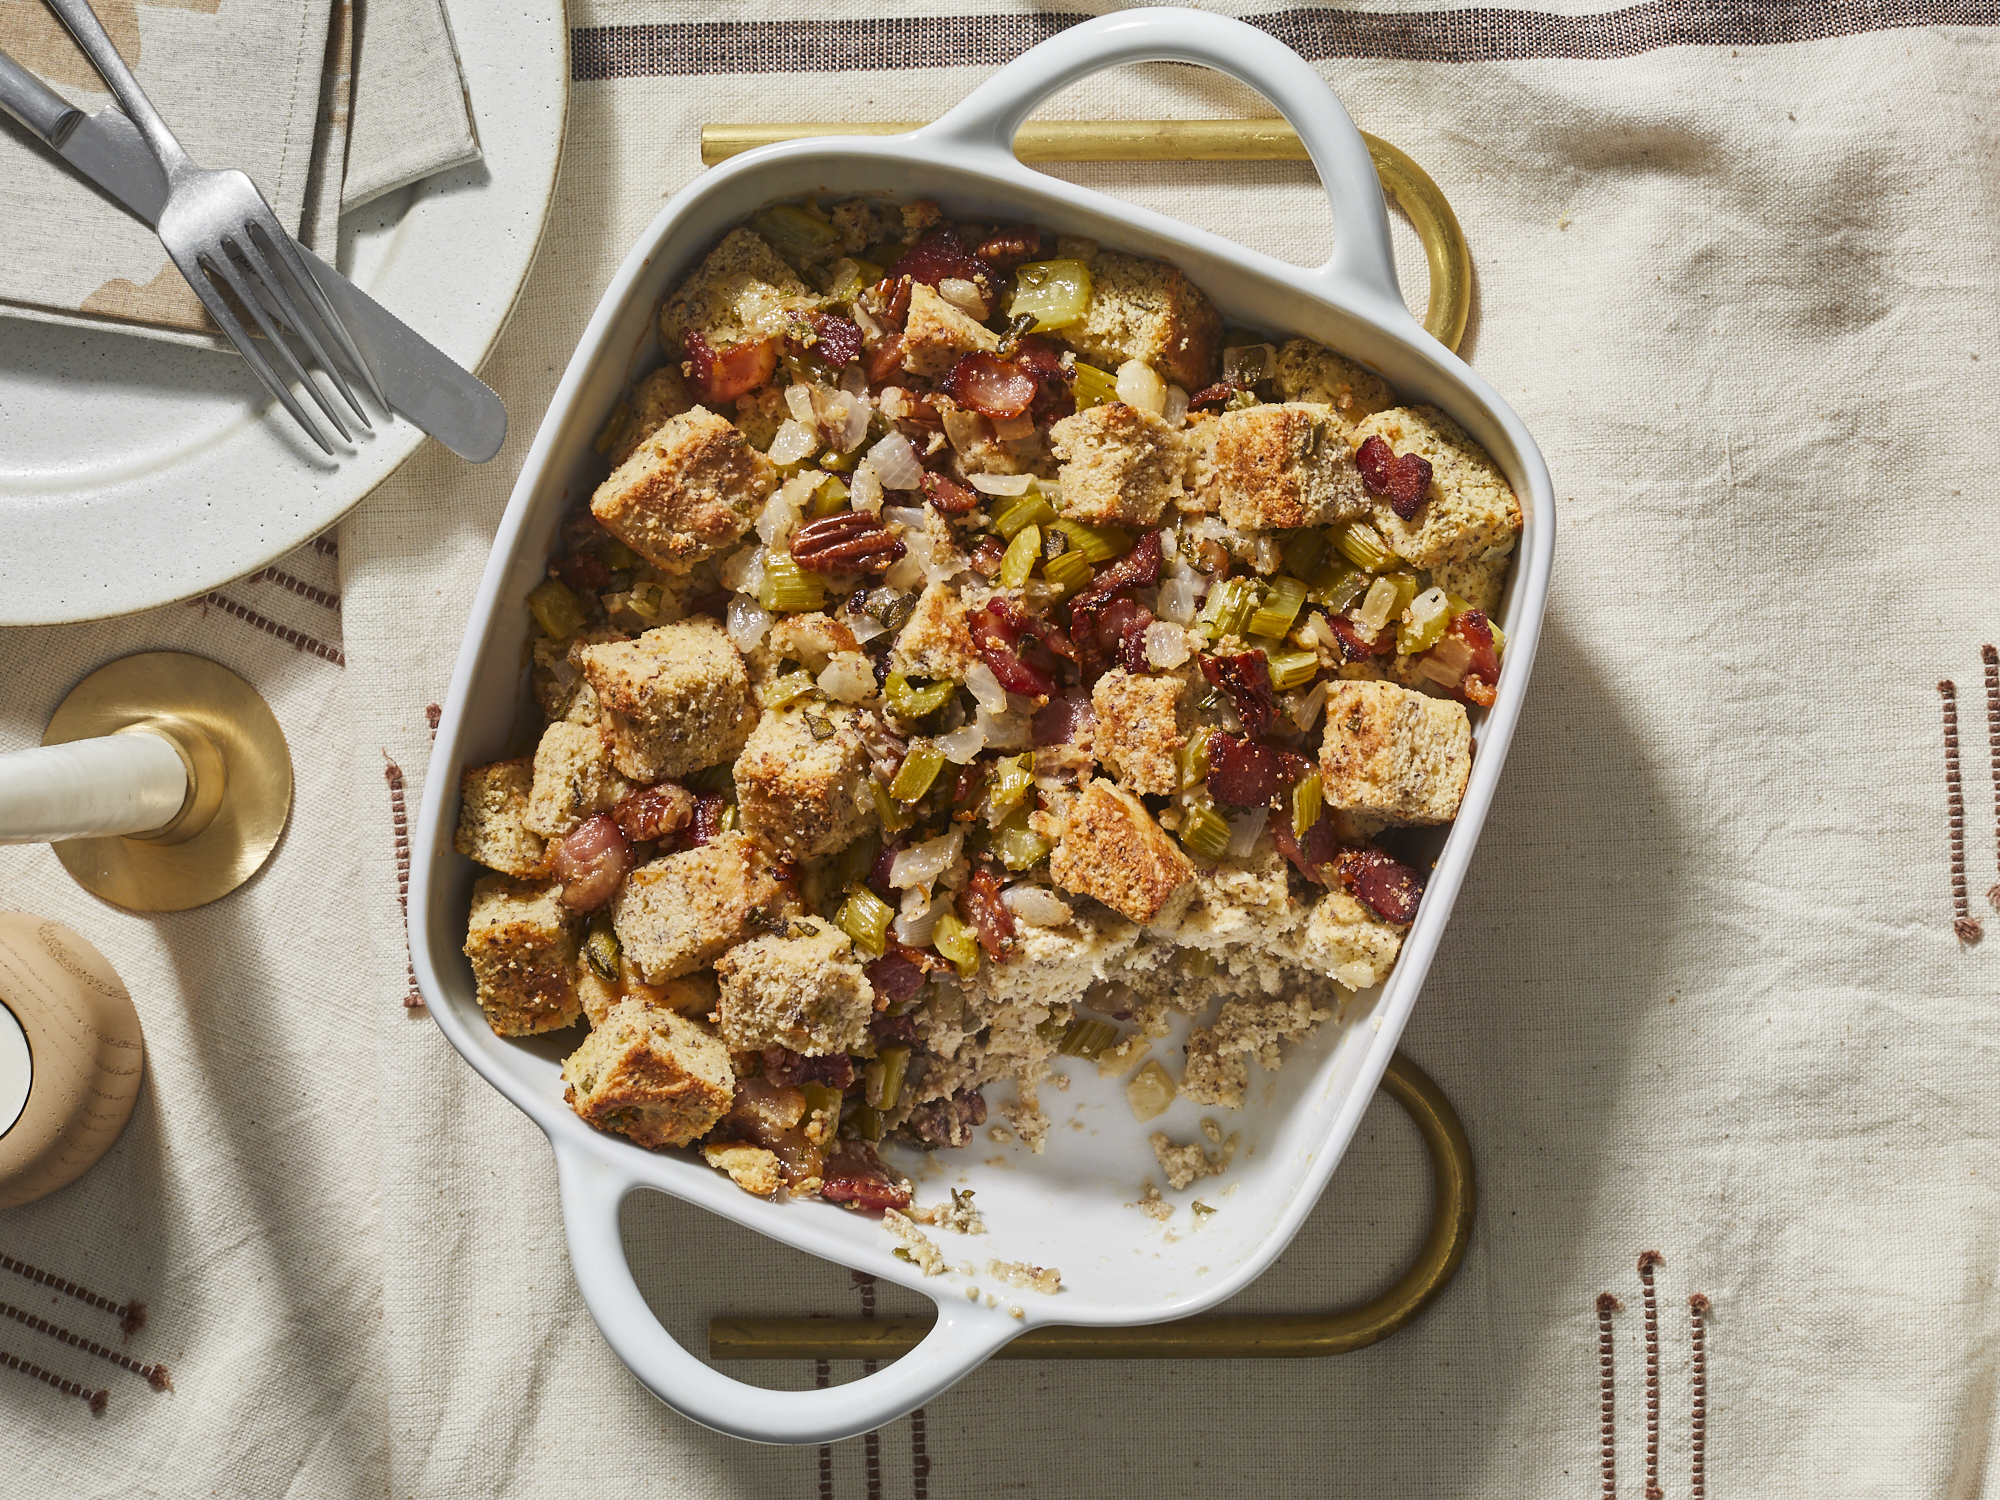 What to Do With Leftover Stuffing